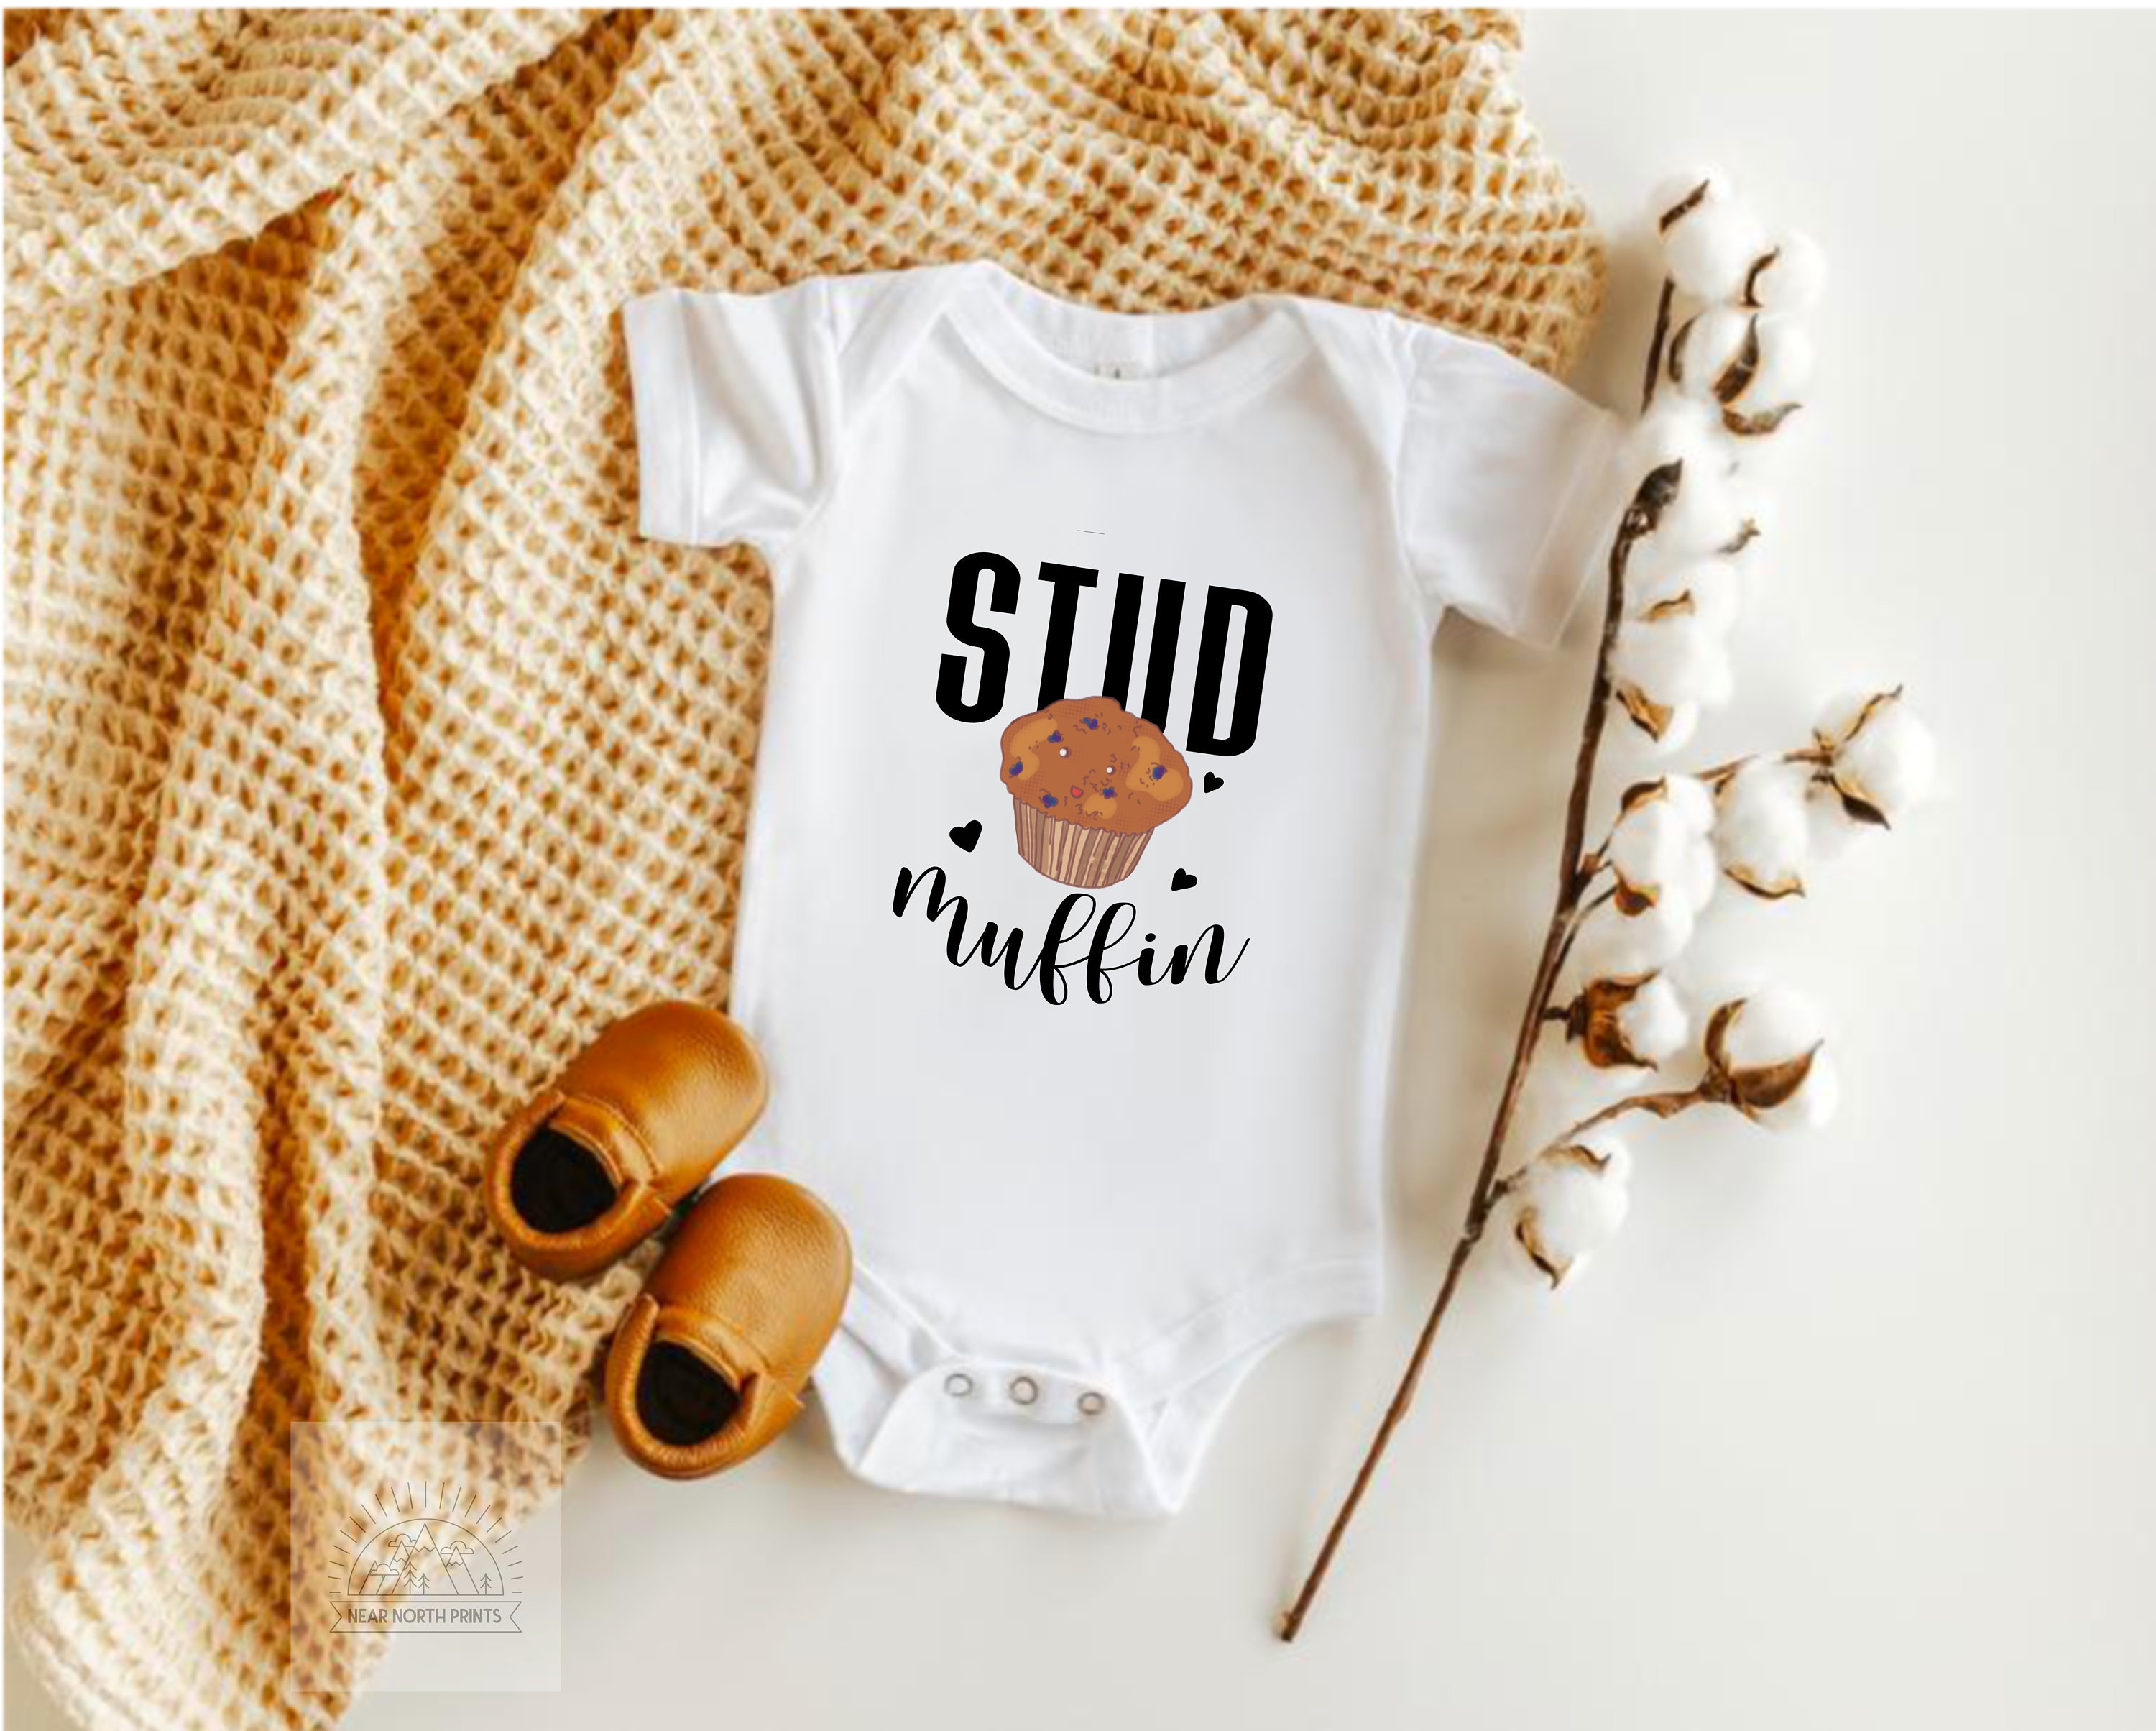 Stud Muffin or Mini Muffin cute food Baby bodysuit Toddler youth Shirt cute birthday baby shower gift B-02062101